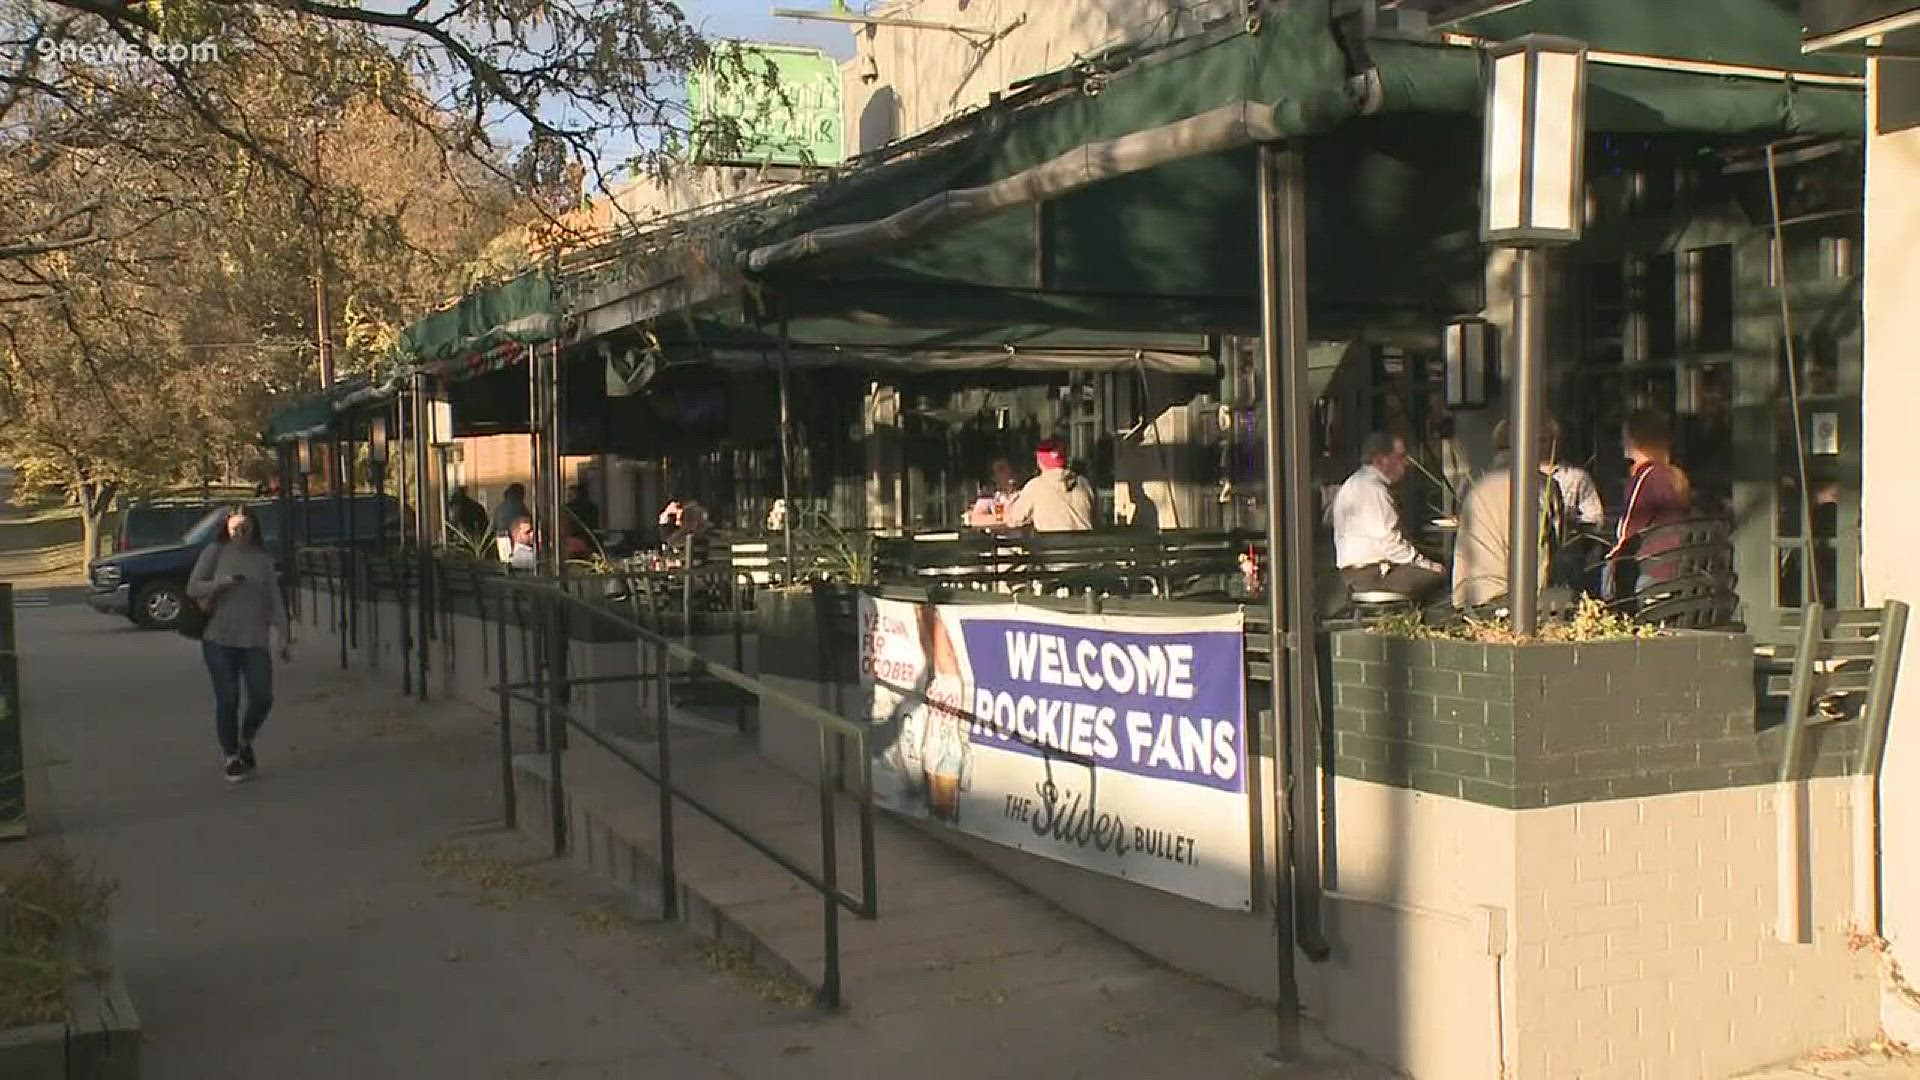 Governor's Park Tavern is in its final weeks of life: it closes for good Nov. 11. The closure was announced two months ago, but many workers have stayed until the end. Now the owner is hoping to help them find new jobs.